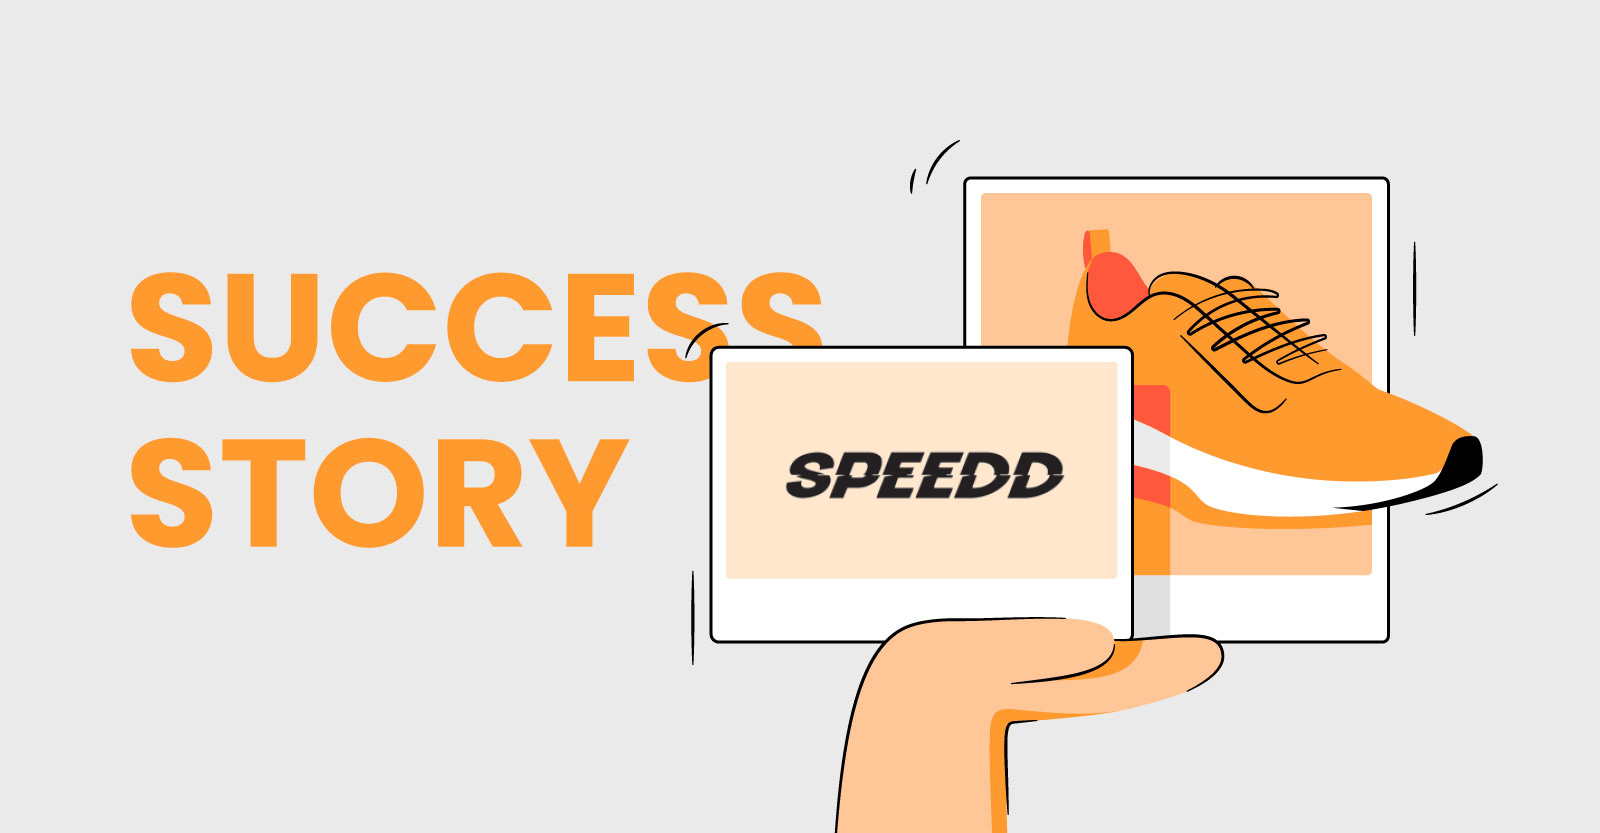 Shopify store Speedd saves 3,6GB and improves SEO with TinyIMG